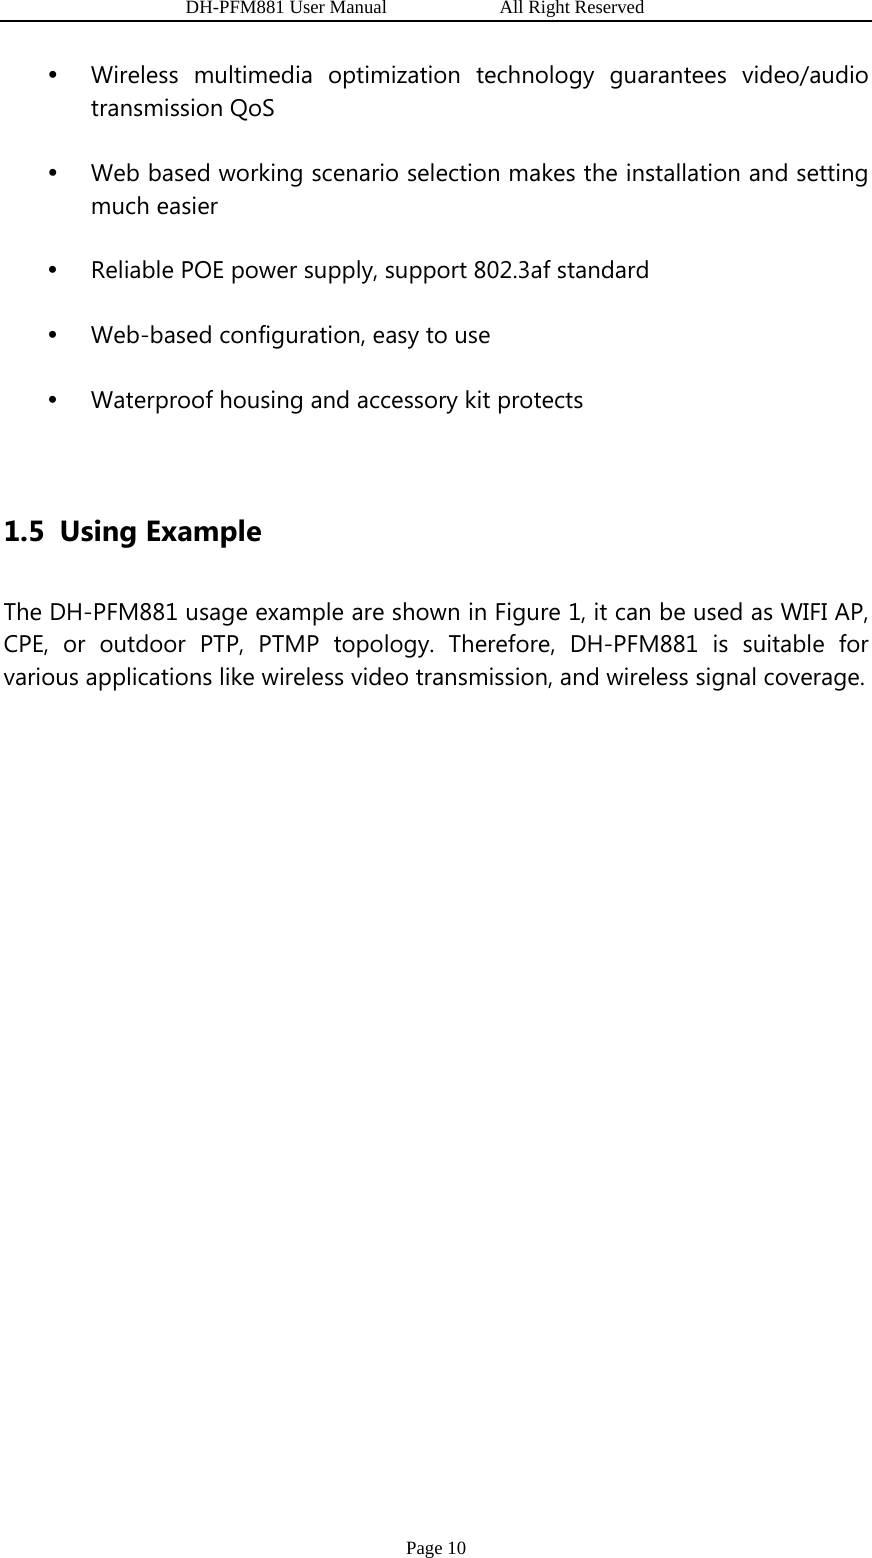                   DH-PFM881 User Manual            All Right Reserved Page 10 y Wireless multimedia optimization technology guarantees video/audio transmission QoS y Web based working scenario selection makes the installation and setting much easier y Reliable POE power supply, support 802.3af standard y Web-based configuration, easy to use y Waterproof housing and accessory kit protects  1.5 Using Example The DH-PFM881 usage example are shown in Figure 1, it can be used as WIFI AP, CPE, or outdoor PTP, PTMP topology. Therefore, DH-PFM881 is suitable for various applications like wireless video transmission, and wireless signal coverage.  